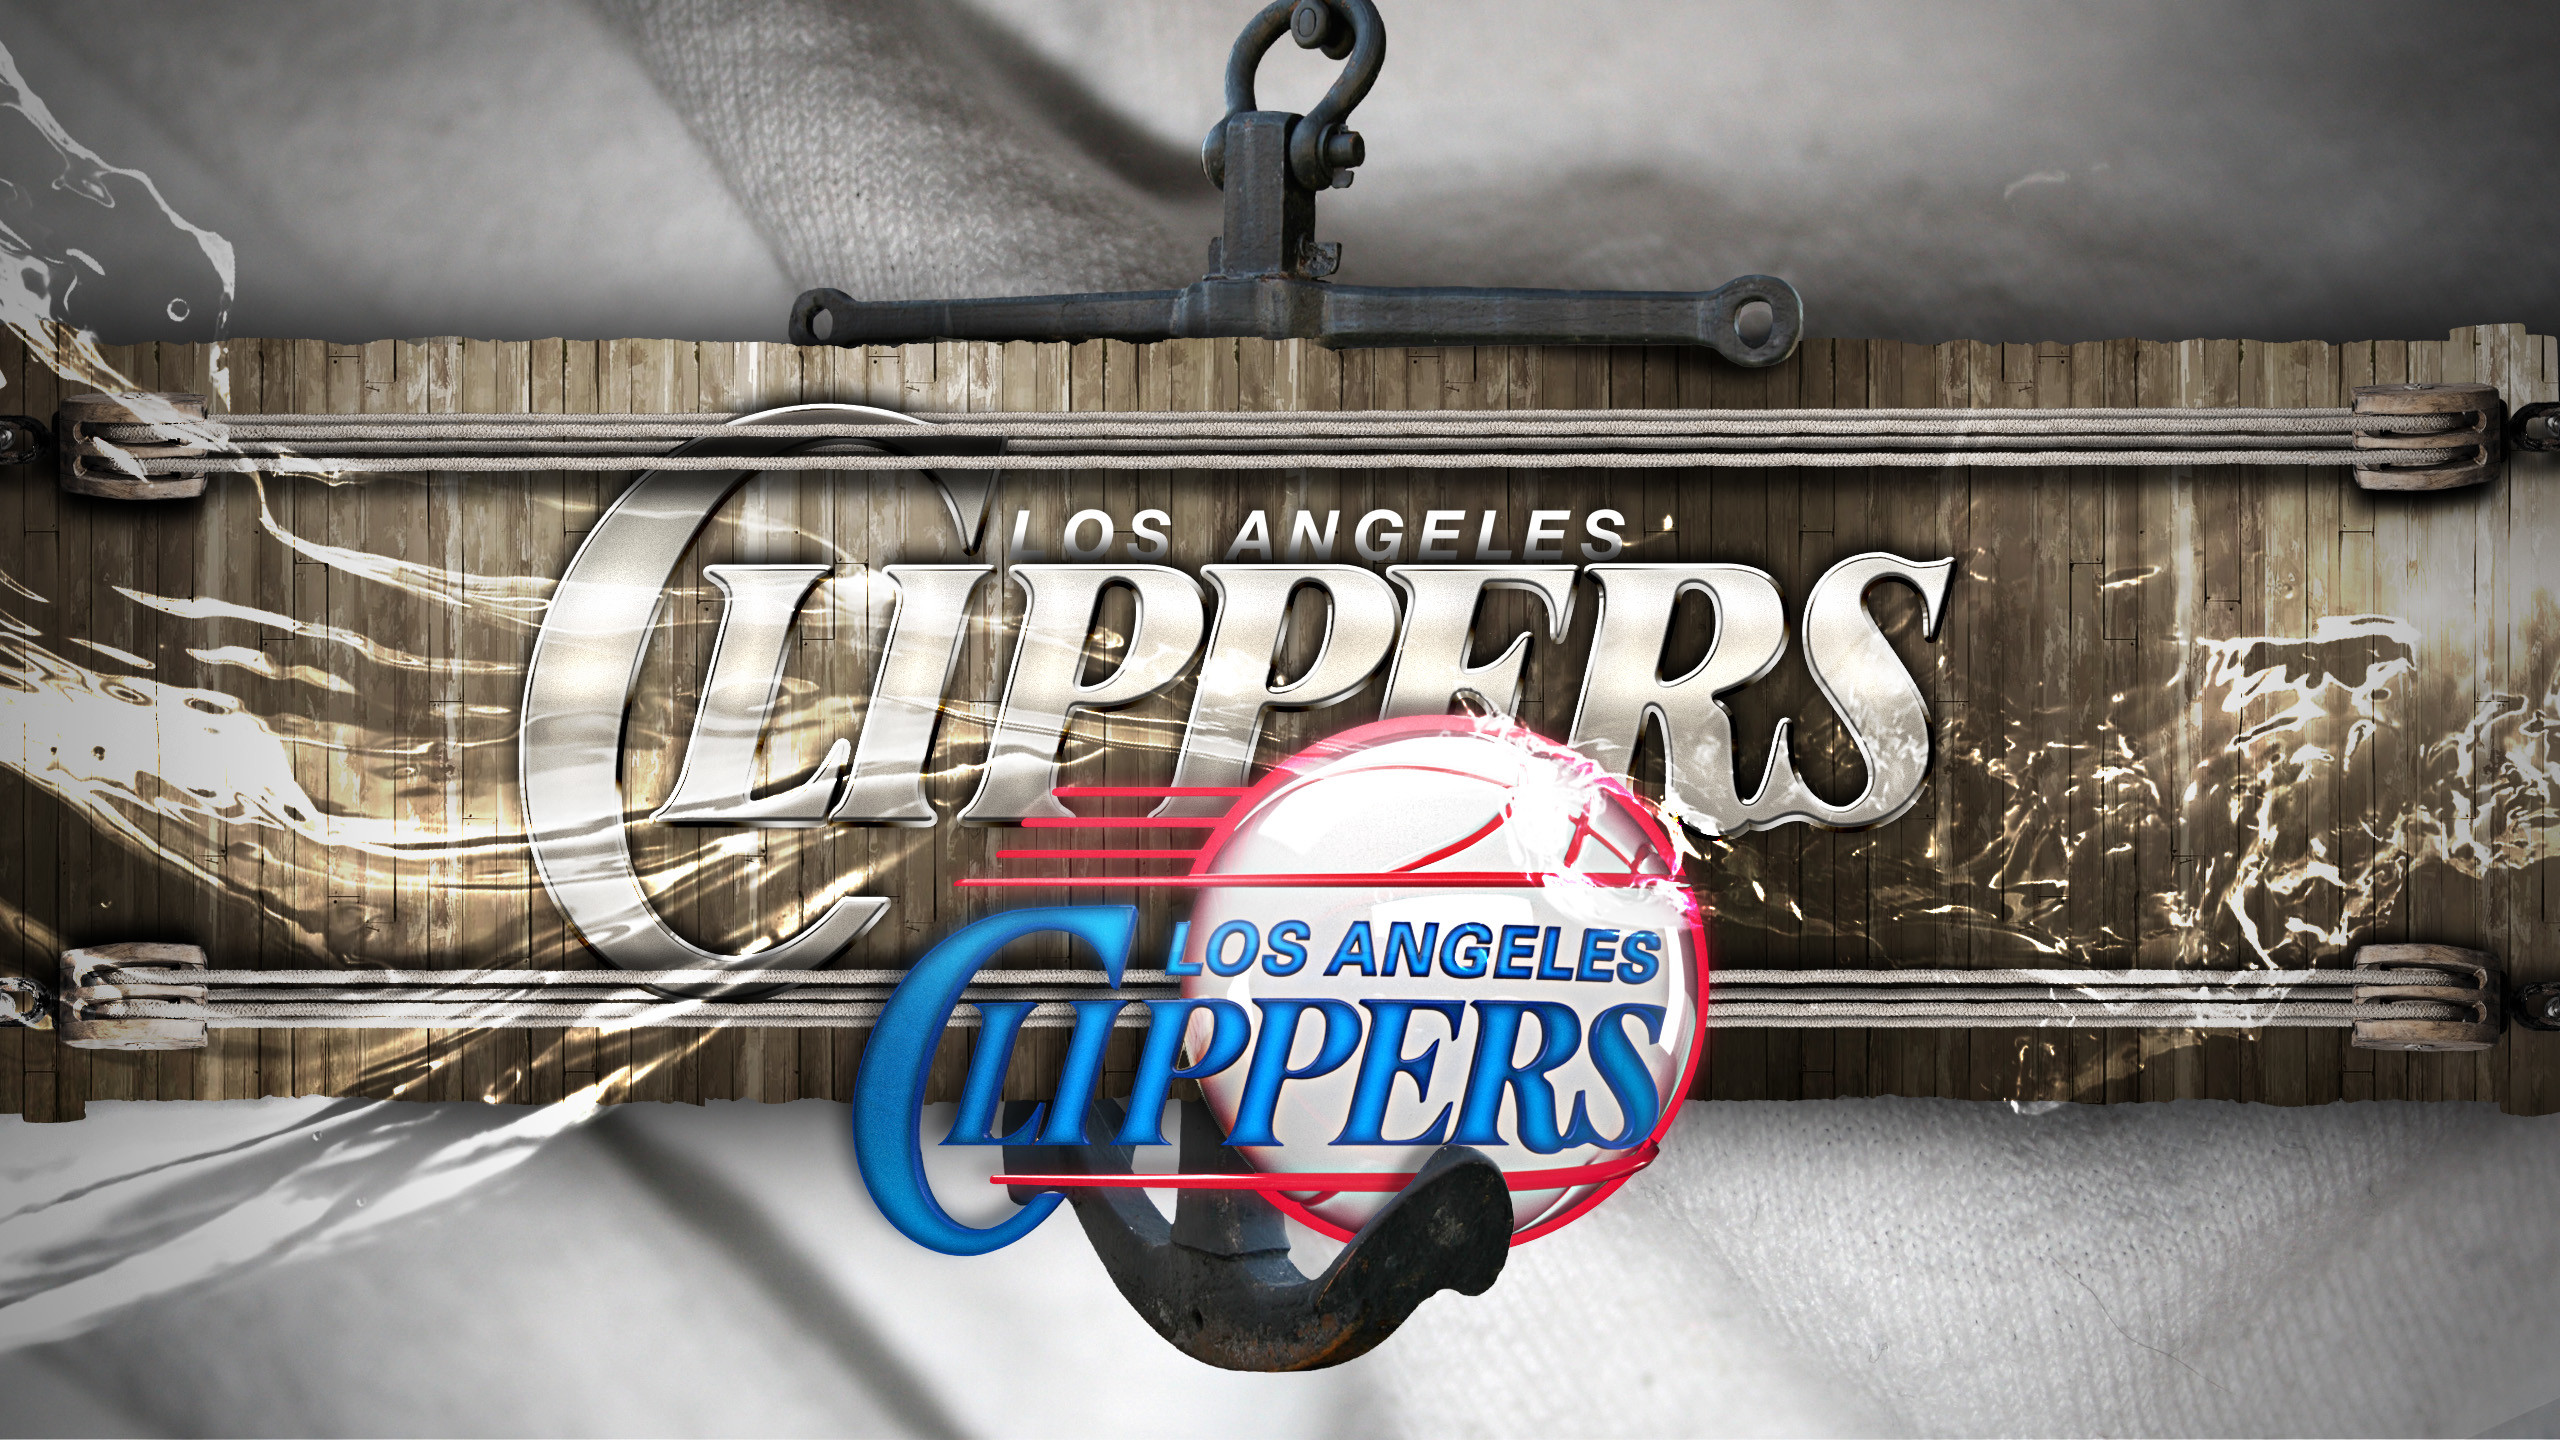 2560x1440 Clippers Wallpapers | THE OFFICIAL SITE OF THE LOS ANGELES CLIPPERS ...